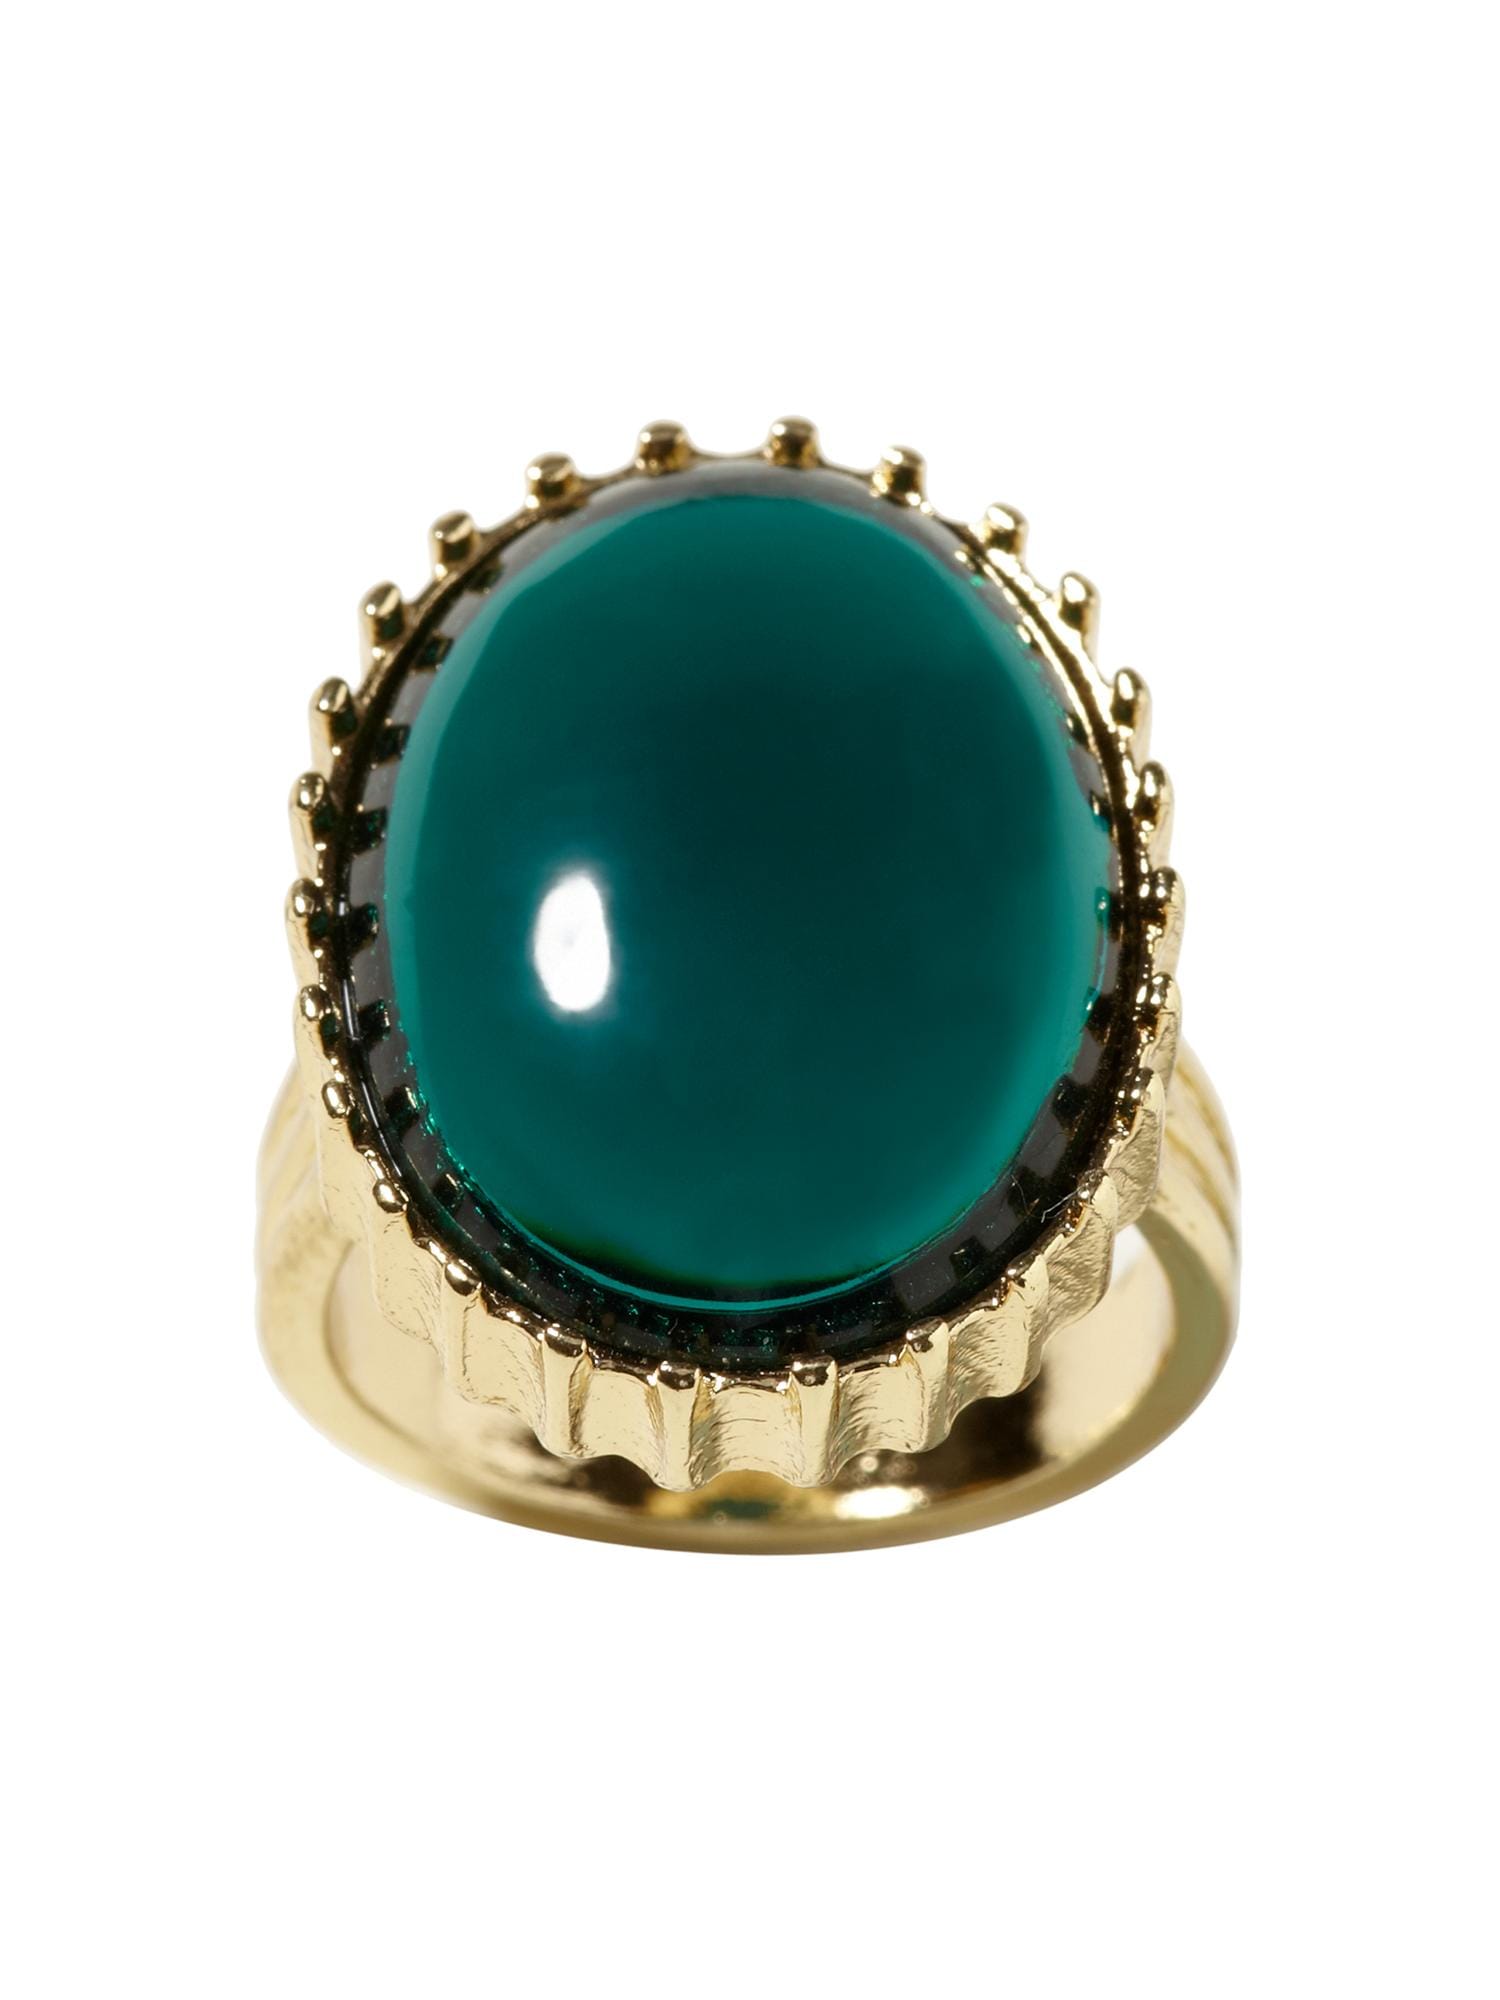 Teal stone oval cocktail ring